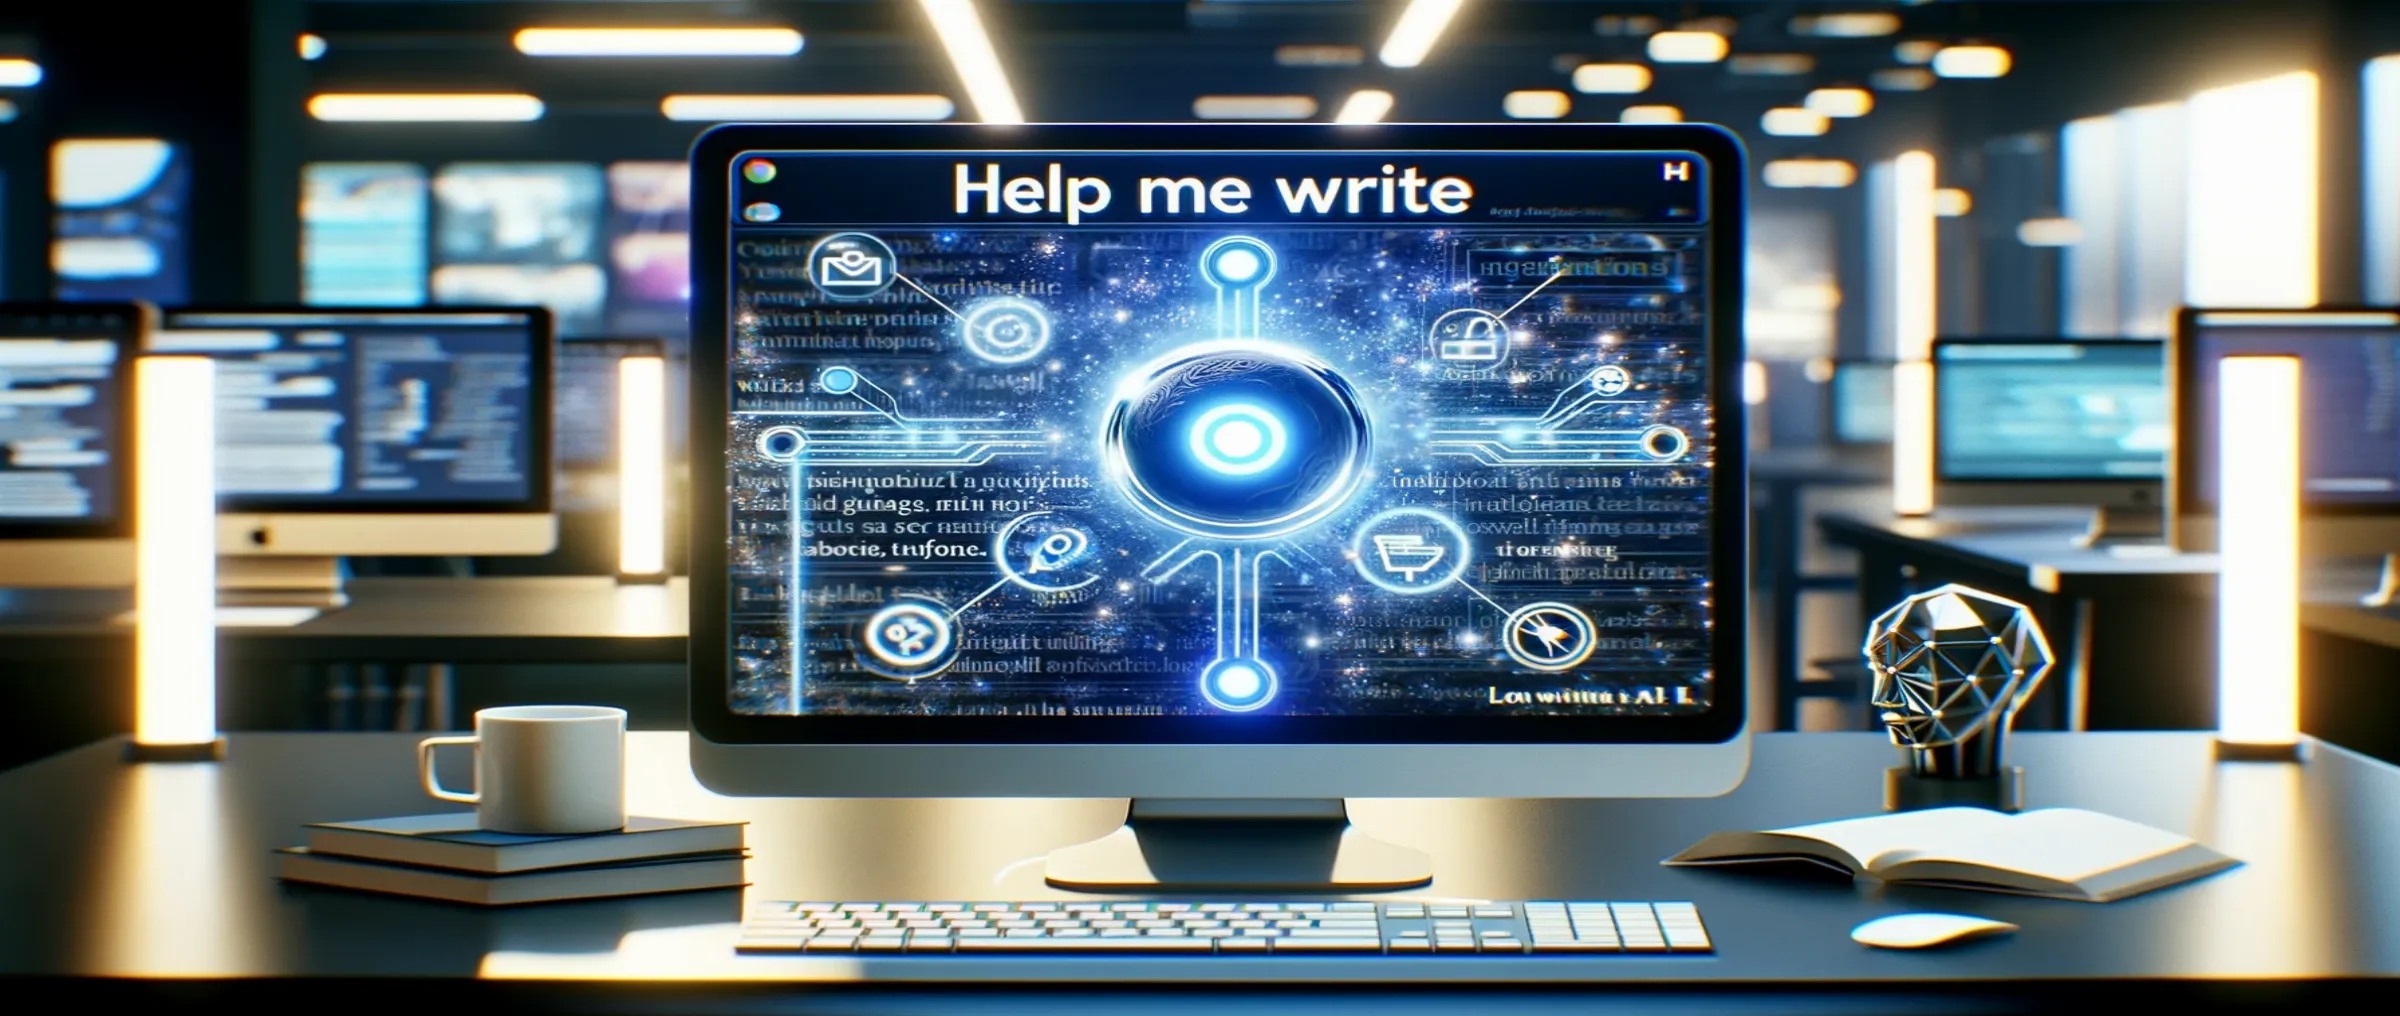 Artificial Intelligence in Chrome: Your Personal Writing Assistant